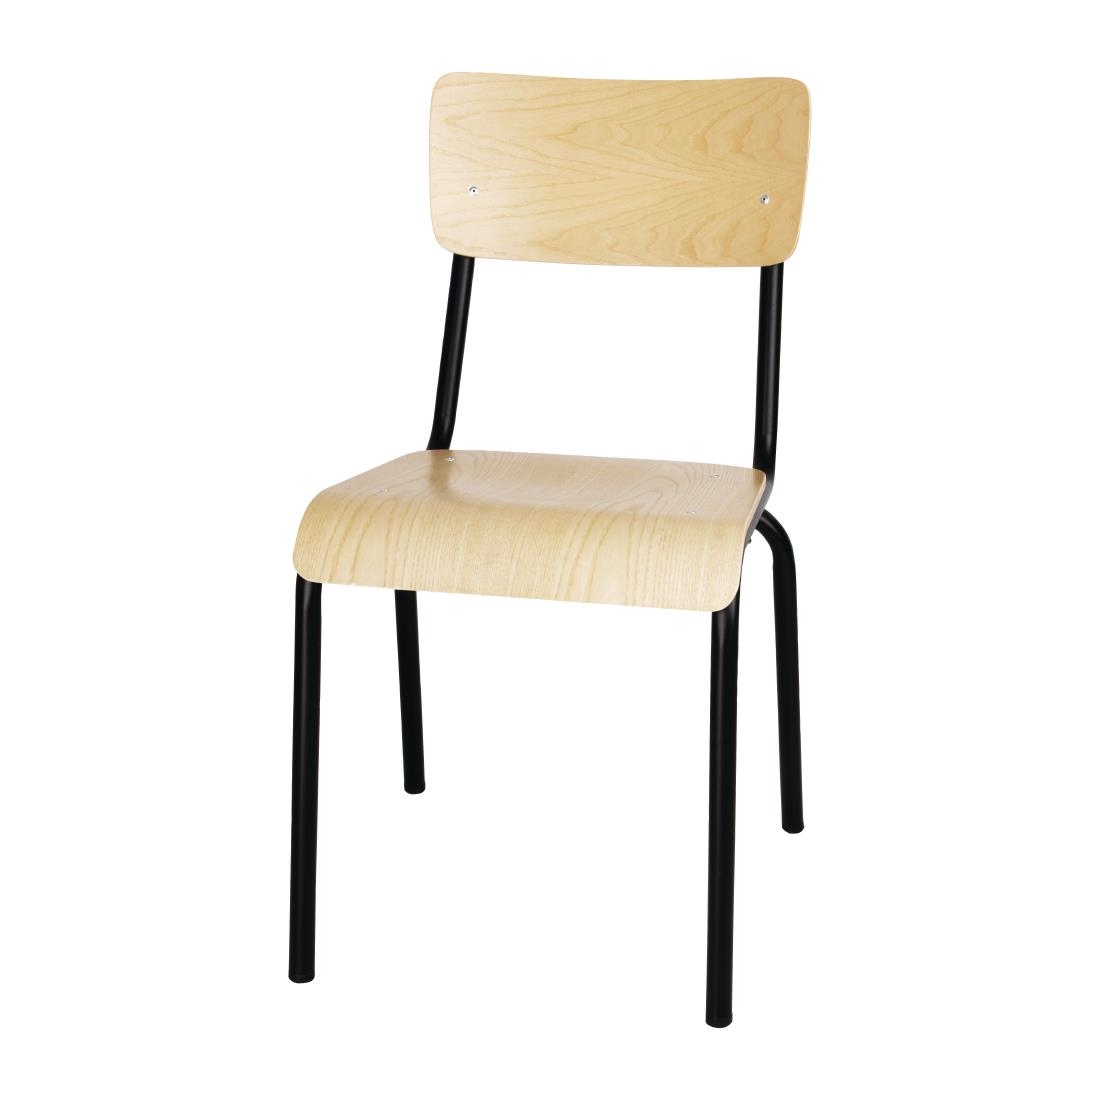 Bolero Cantina Side Chairs with Wooden Seat Pad and Backrest Black (Pack of 4)